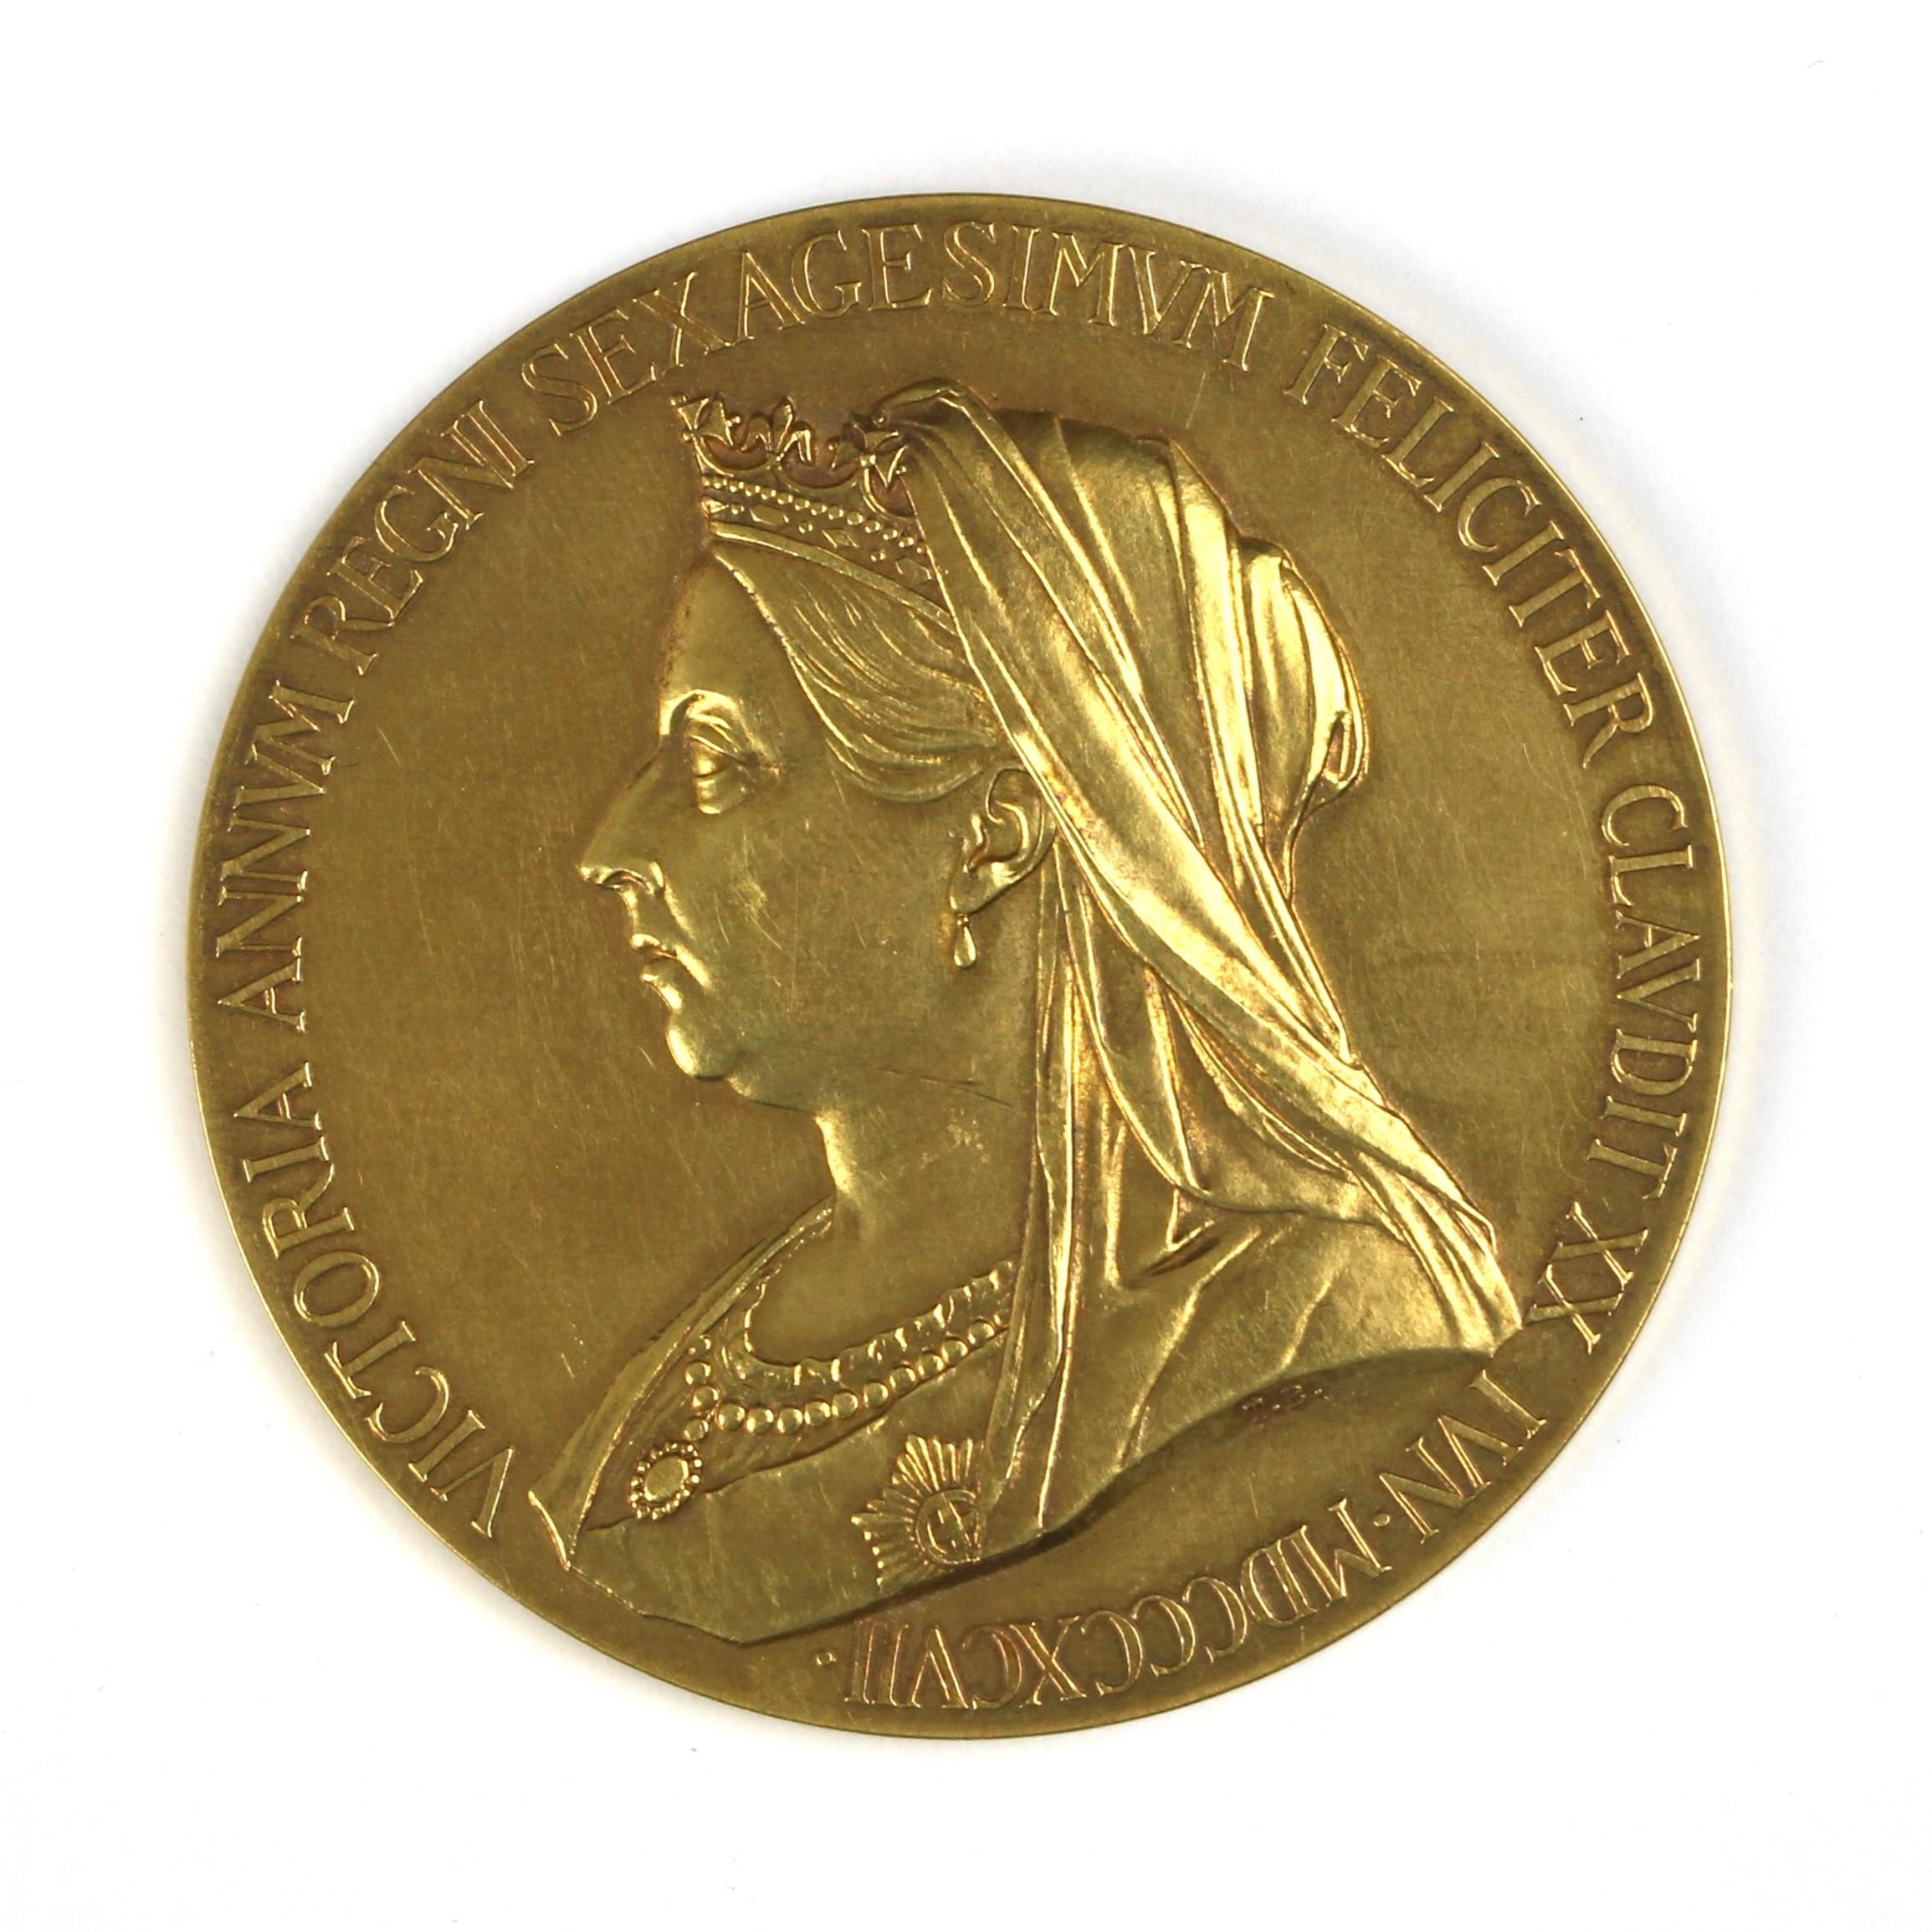 Victoria (1837-1901), Diamond Jubilee 1897, official gold medal, large size, by G. W. de Saulles - Image 2 of 3